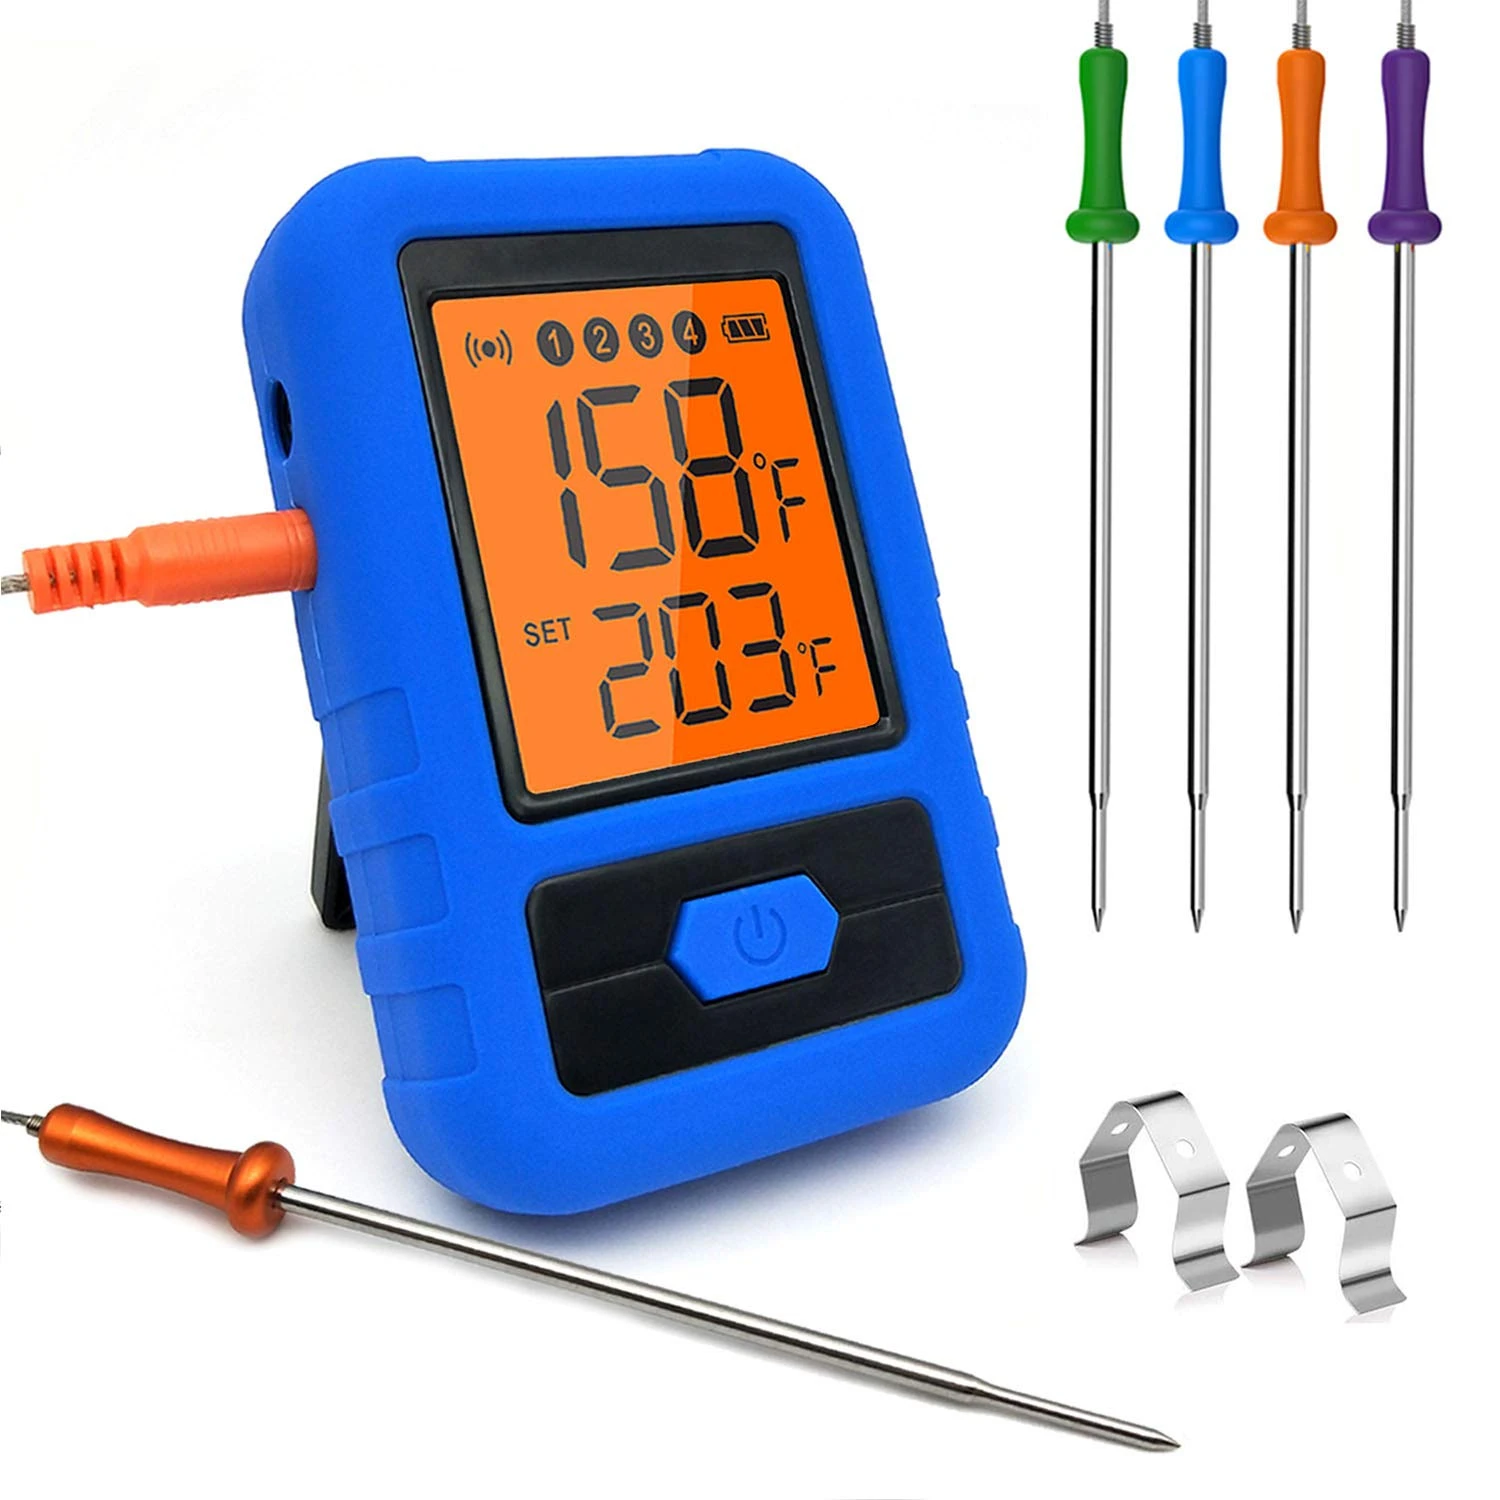 

Wireless Bluetooth Meat Food Thermometer for Grill Barbecue Cooking Smoker Oven Kitchen Remote 4 Probes